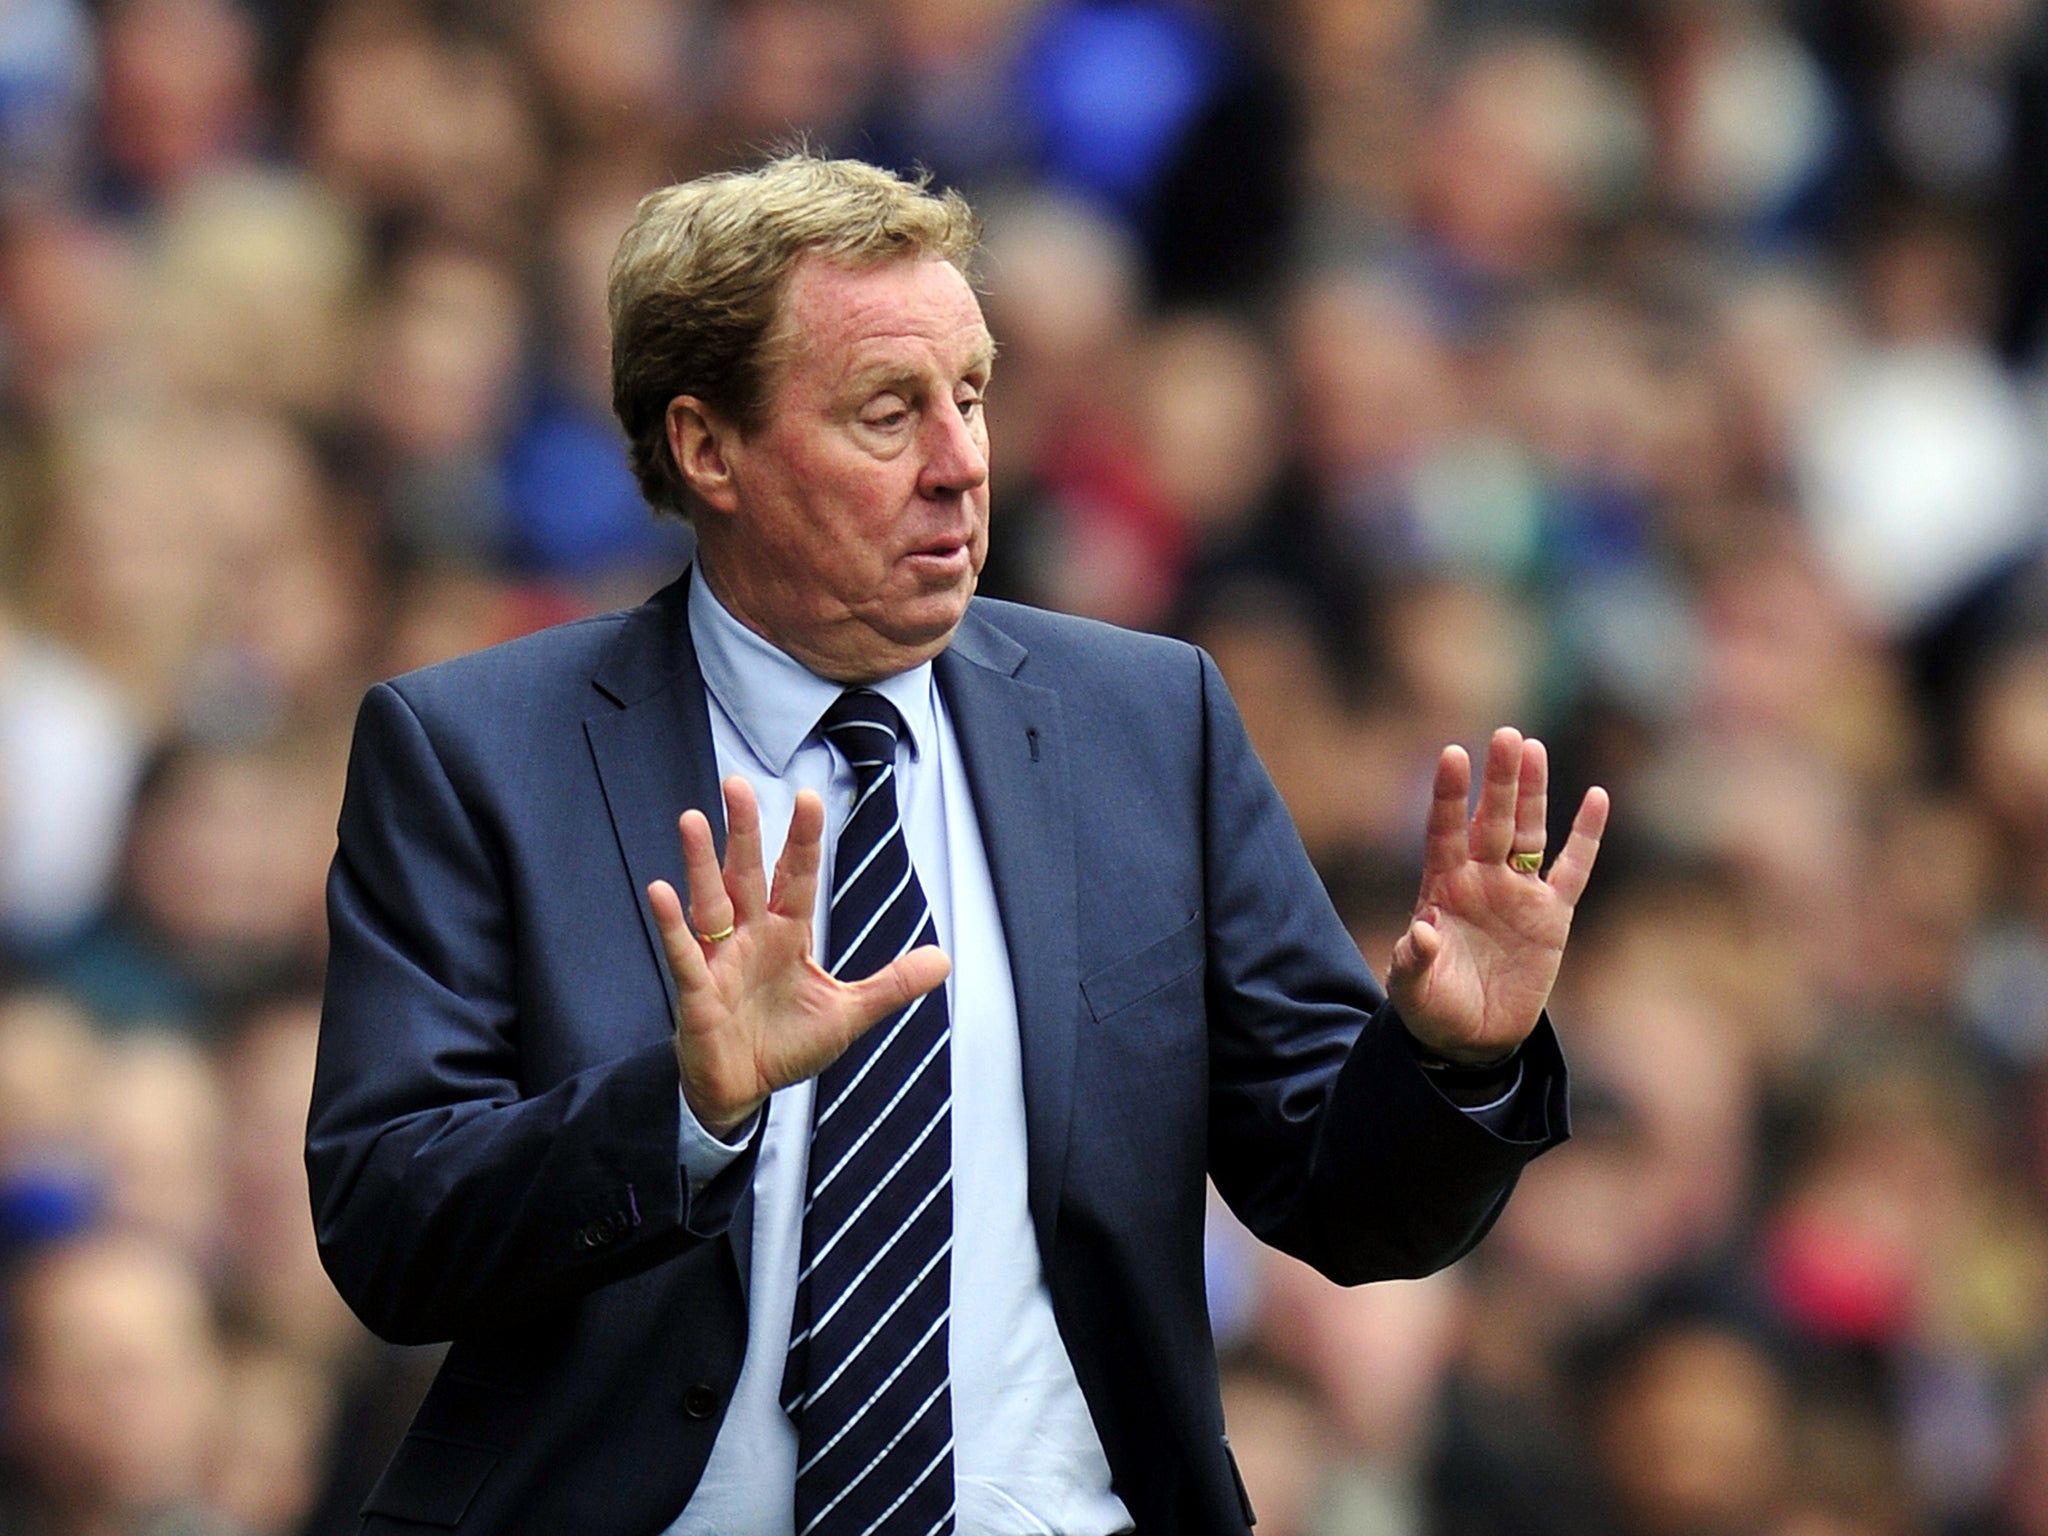 Harry Redknapp faces a challenge in getting QPR back to the Premier League